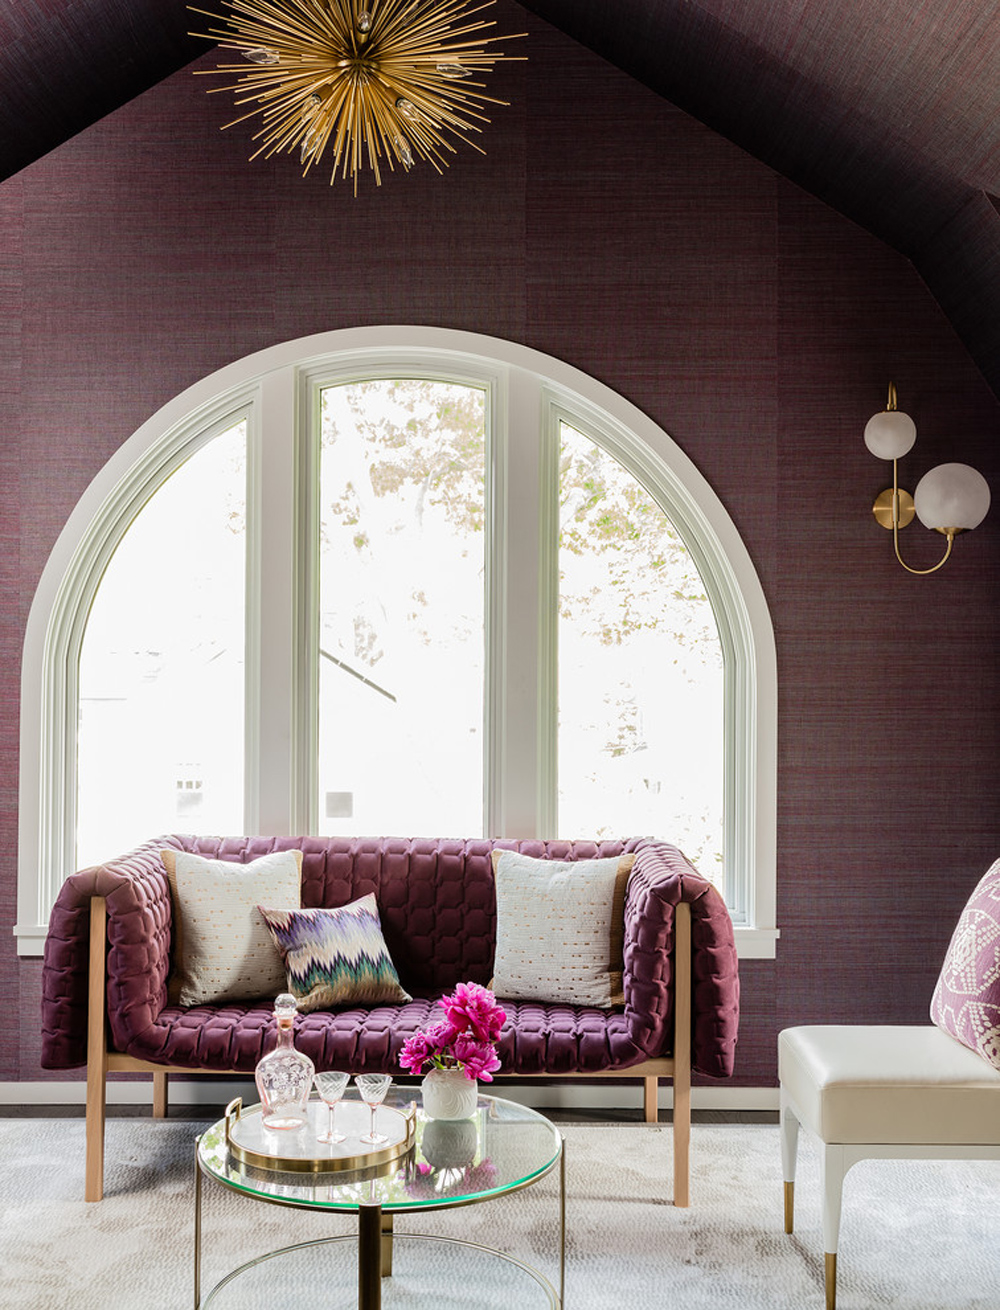 Larchmont-by-colorTHEORY-Boston-2 Colors that go with purple and how to decorate with this color